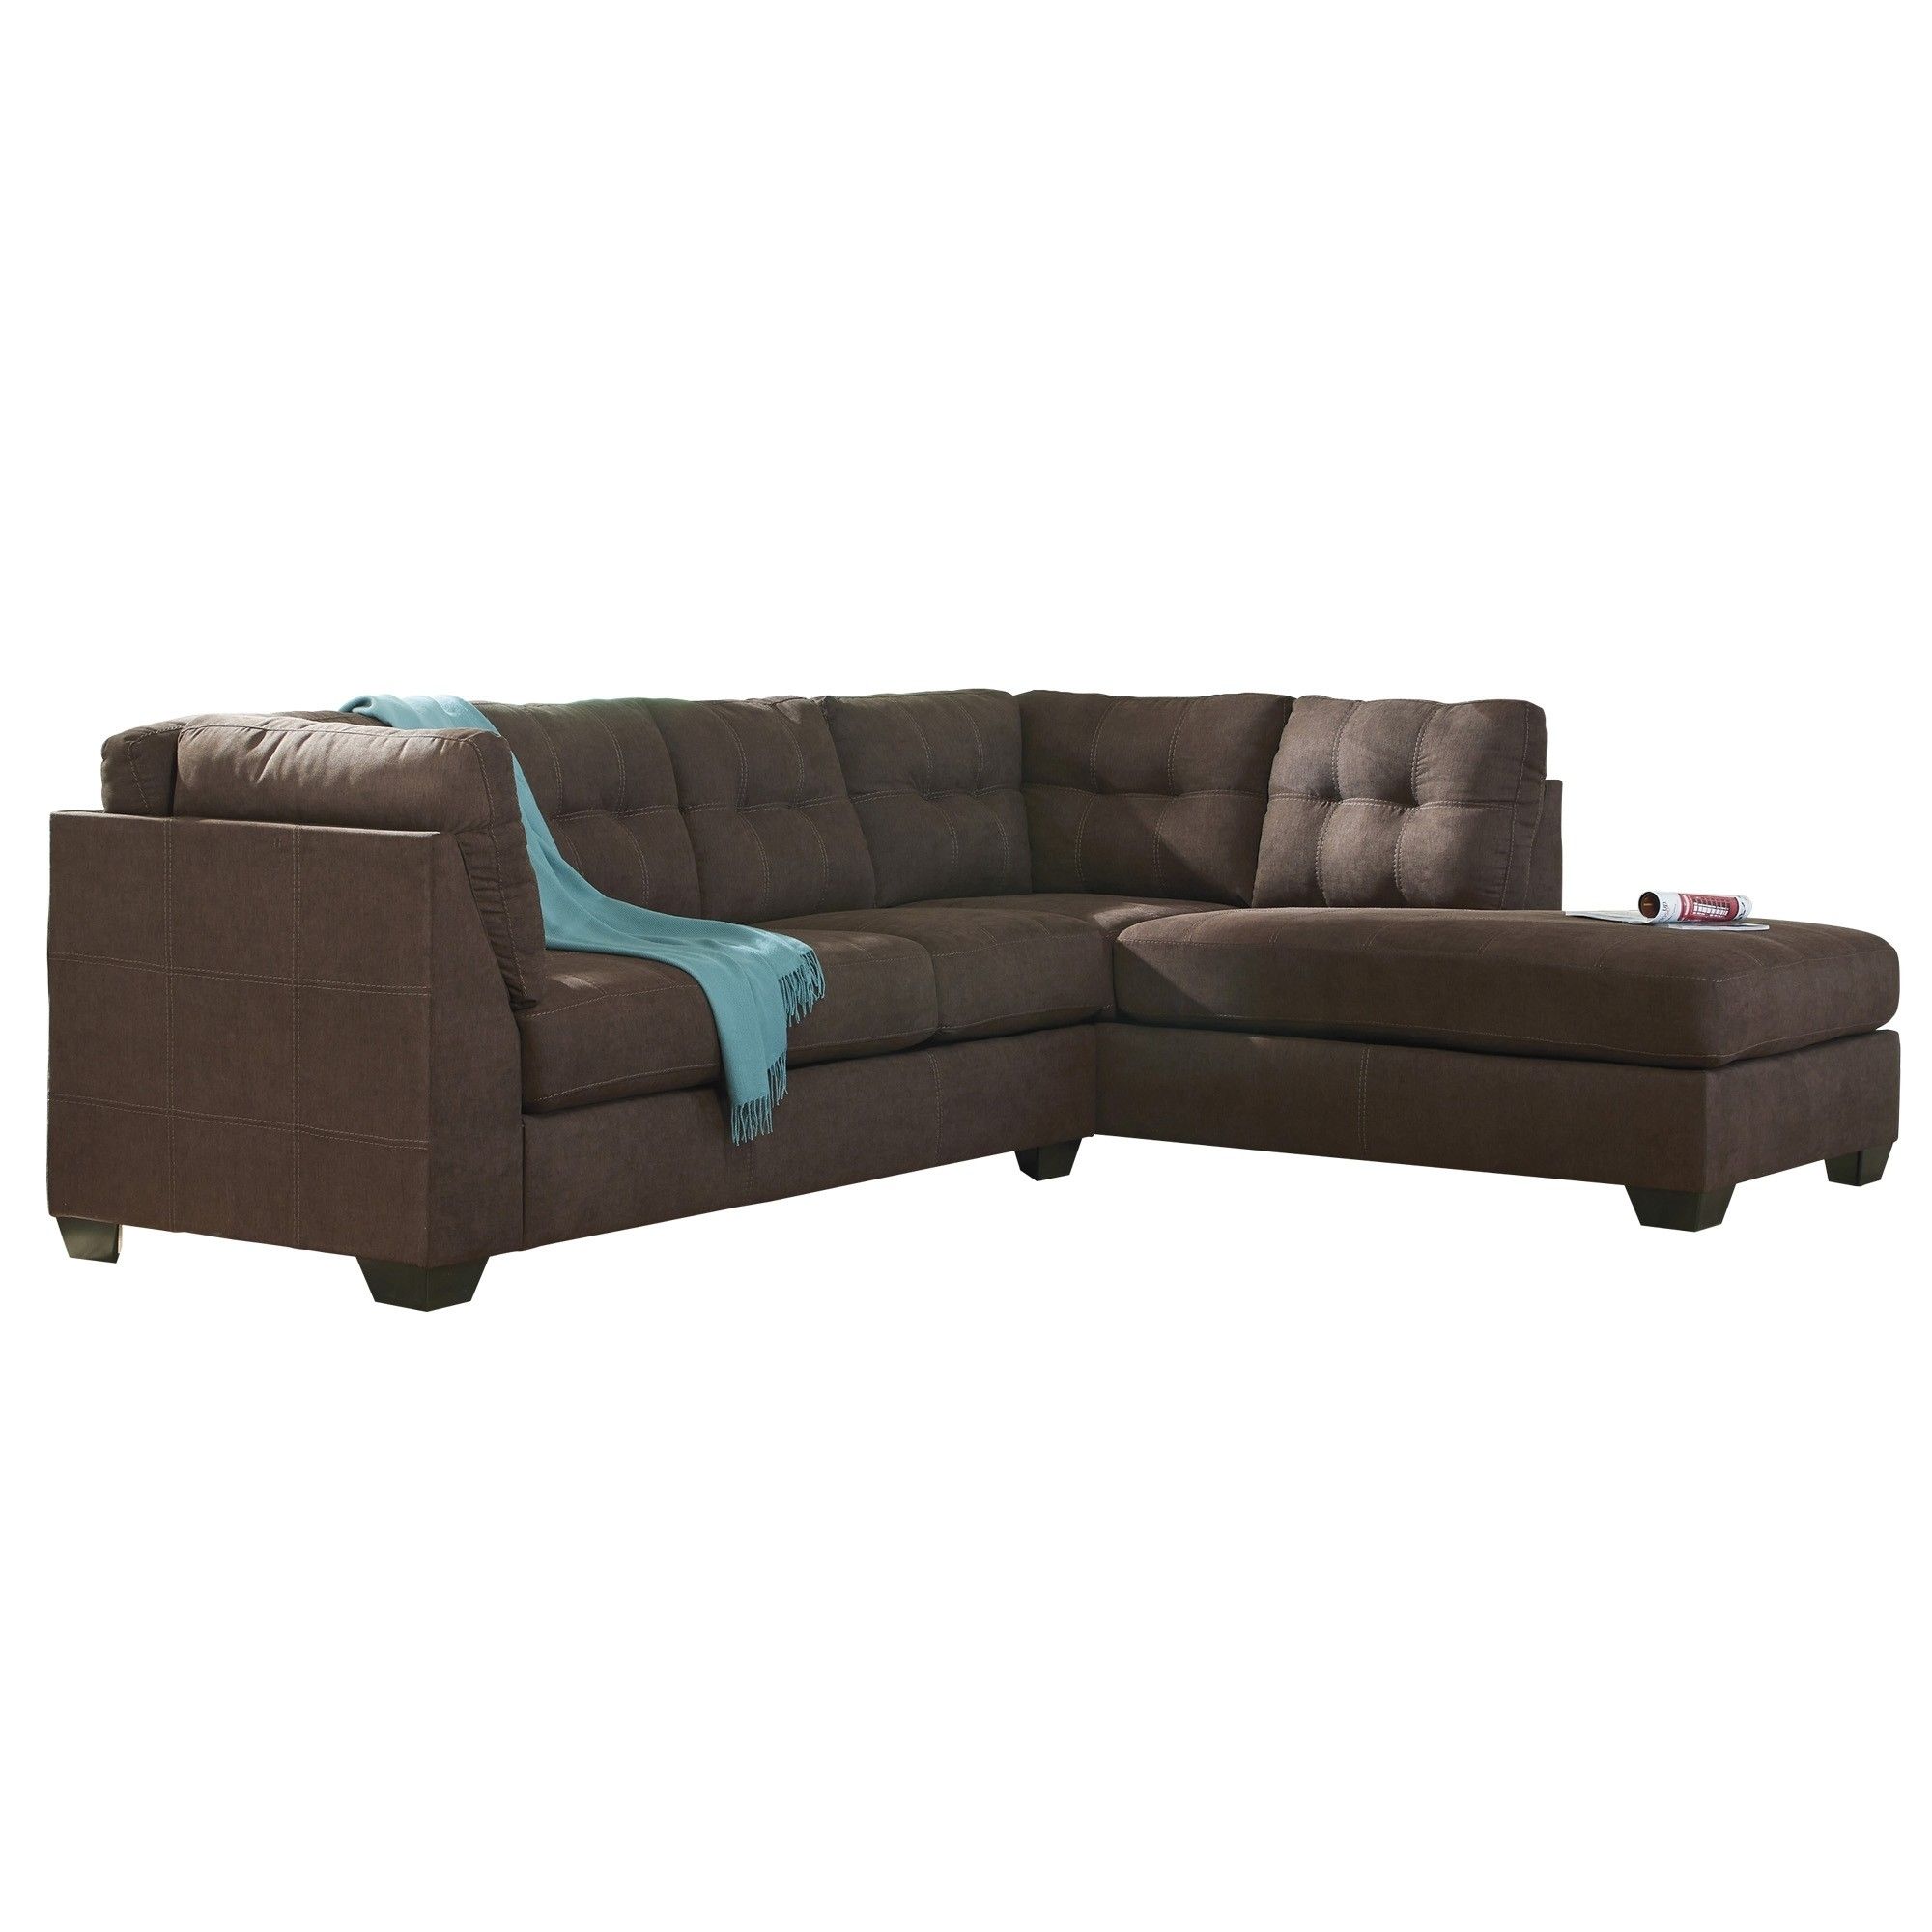 Maier 2 Piece Sectional With Sleeper | Tepperman's Throughout Teppermans Sectional Sofas (View 3 of 10)